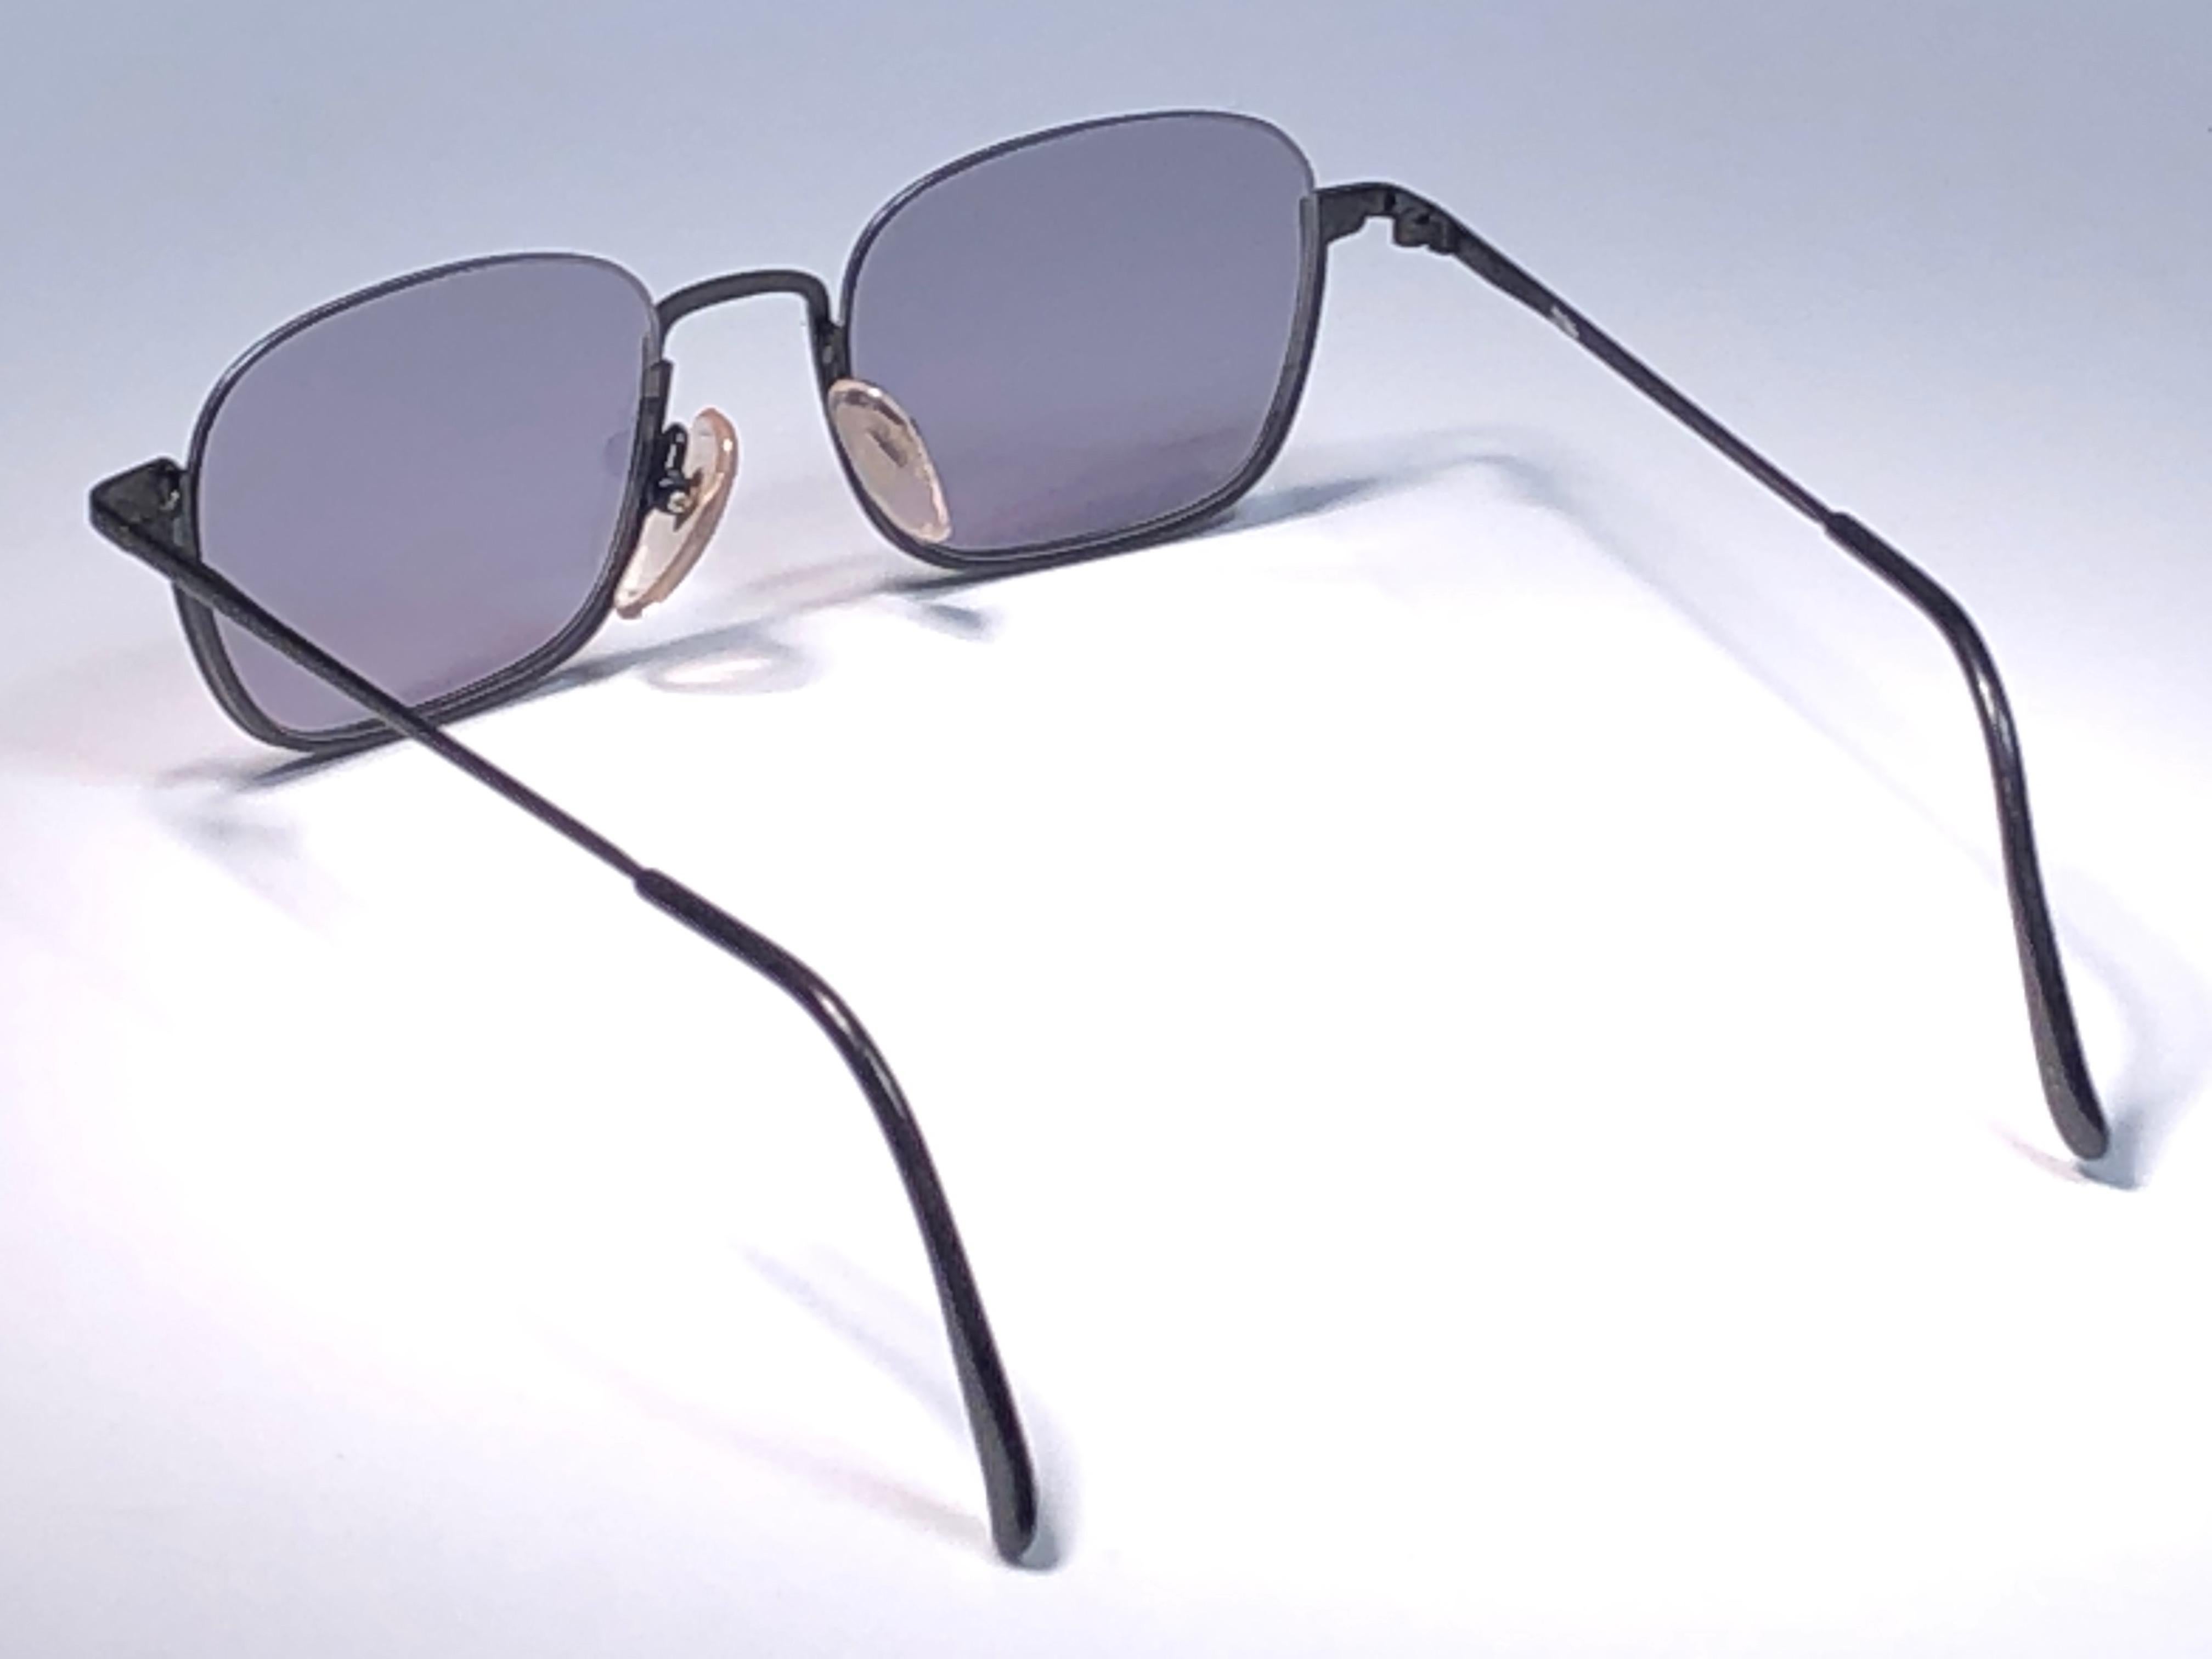 New Jean Paul Gaultier 55 7161 Half Frame Sunglasses 1990's Made in Japan  For Sale 3